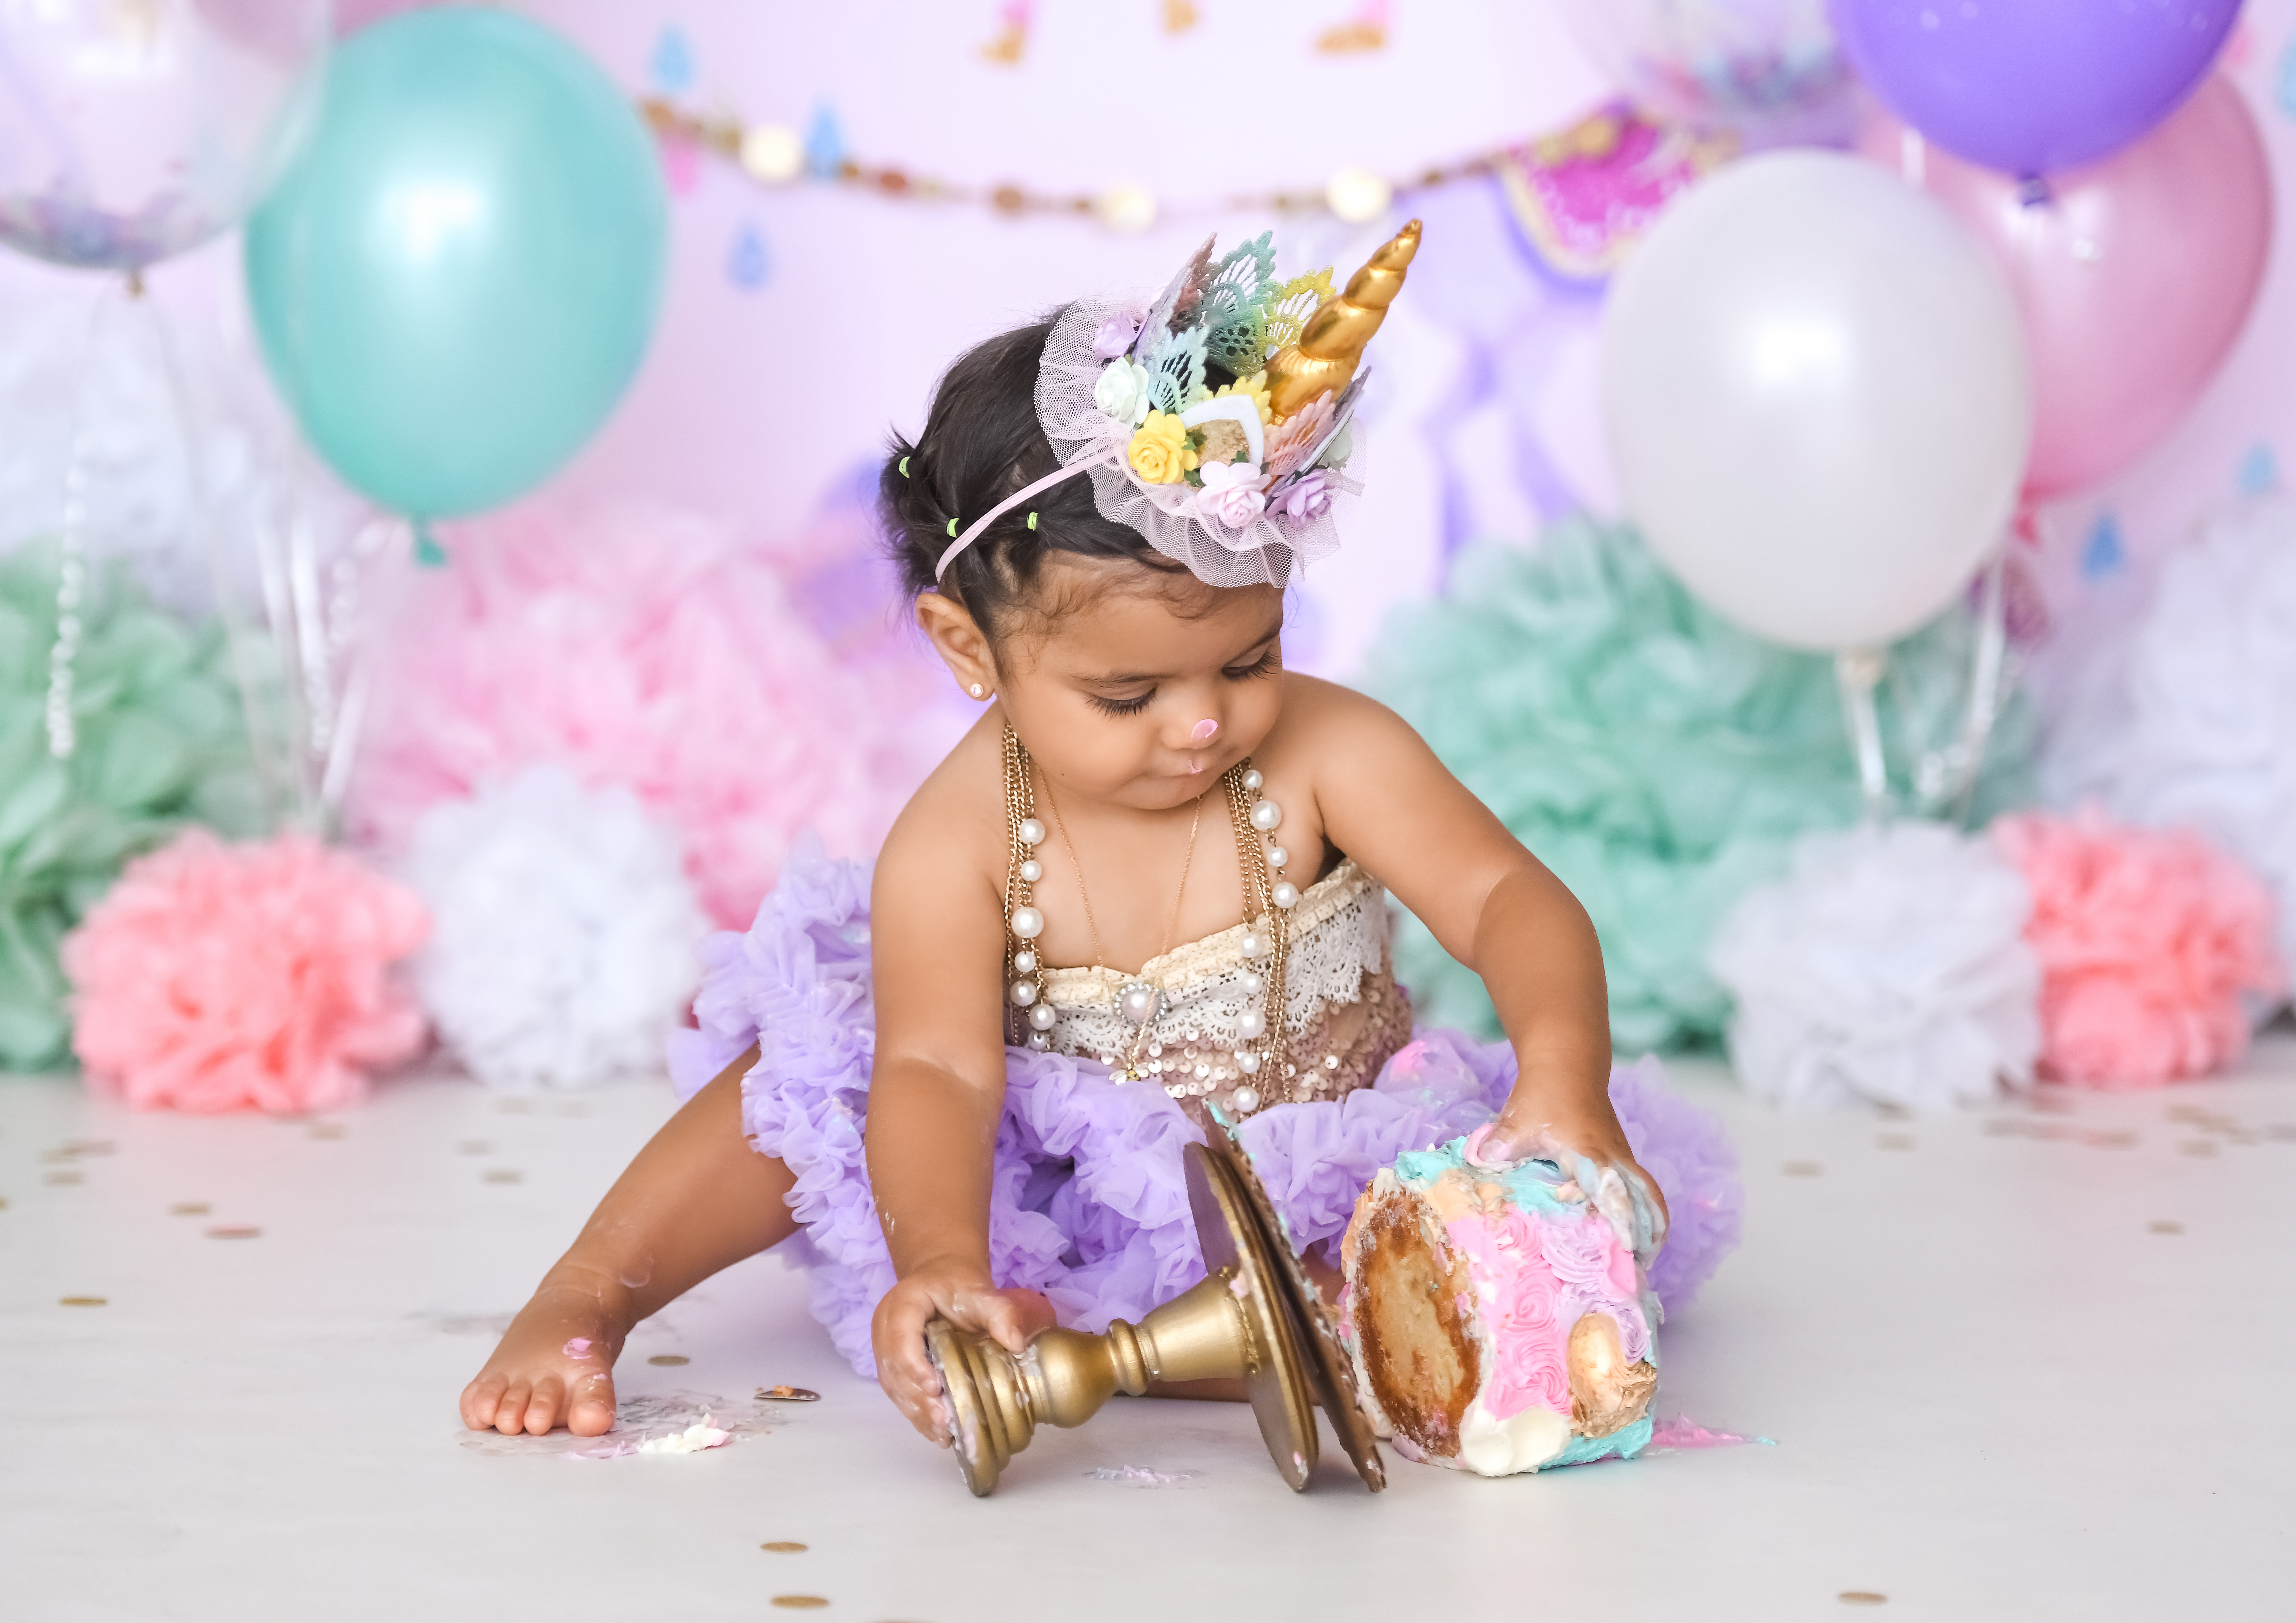 Unicorn First Birthday Photo Los Angeles Angeles based photo studio, The Pod Photography, specializing in maternity, newborn, baby, first birthday cake smash and family picture